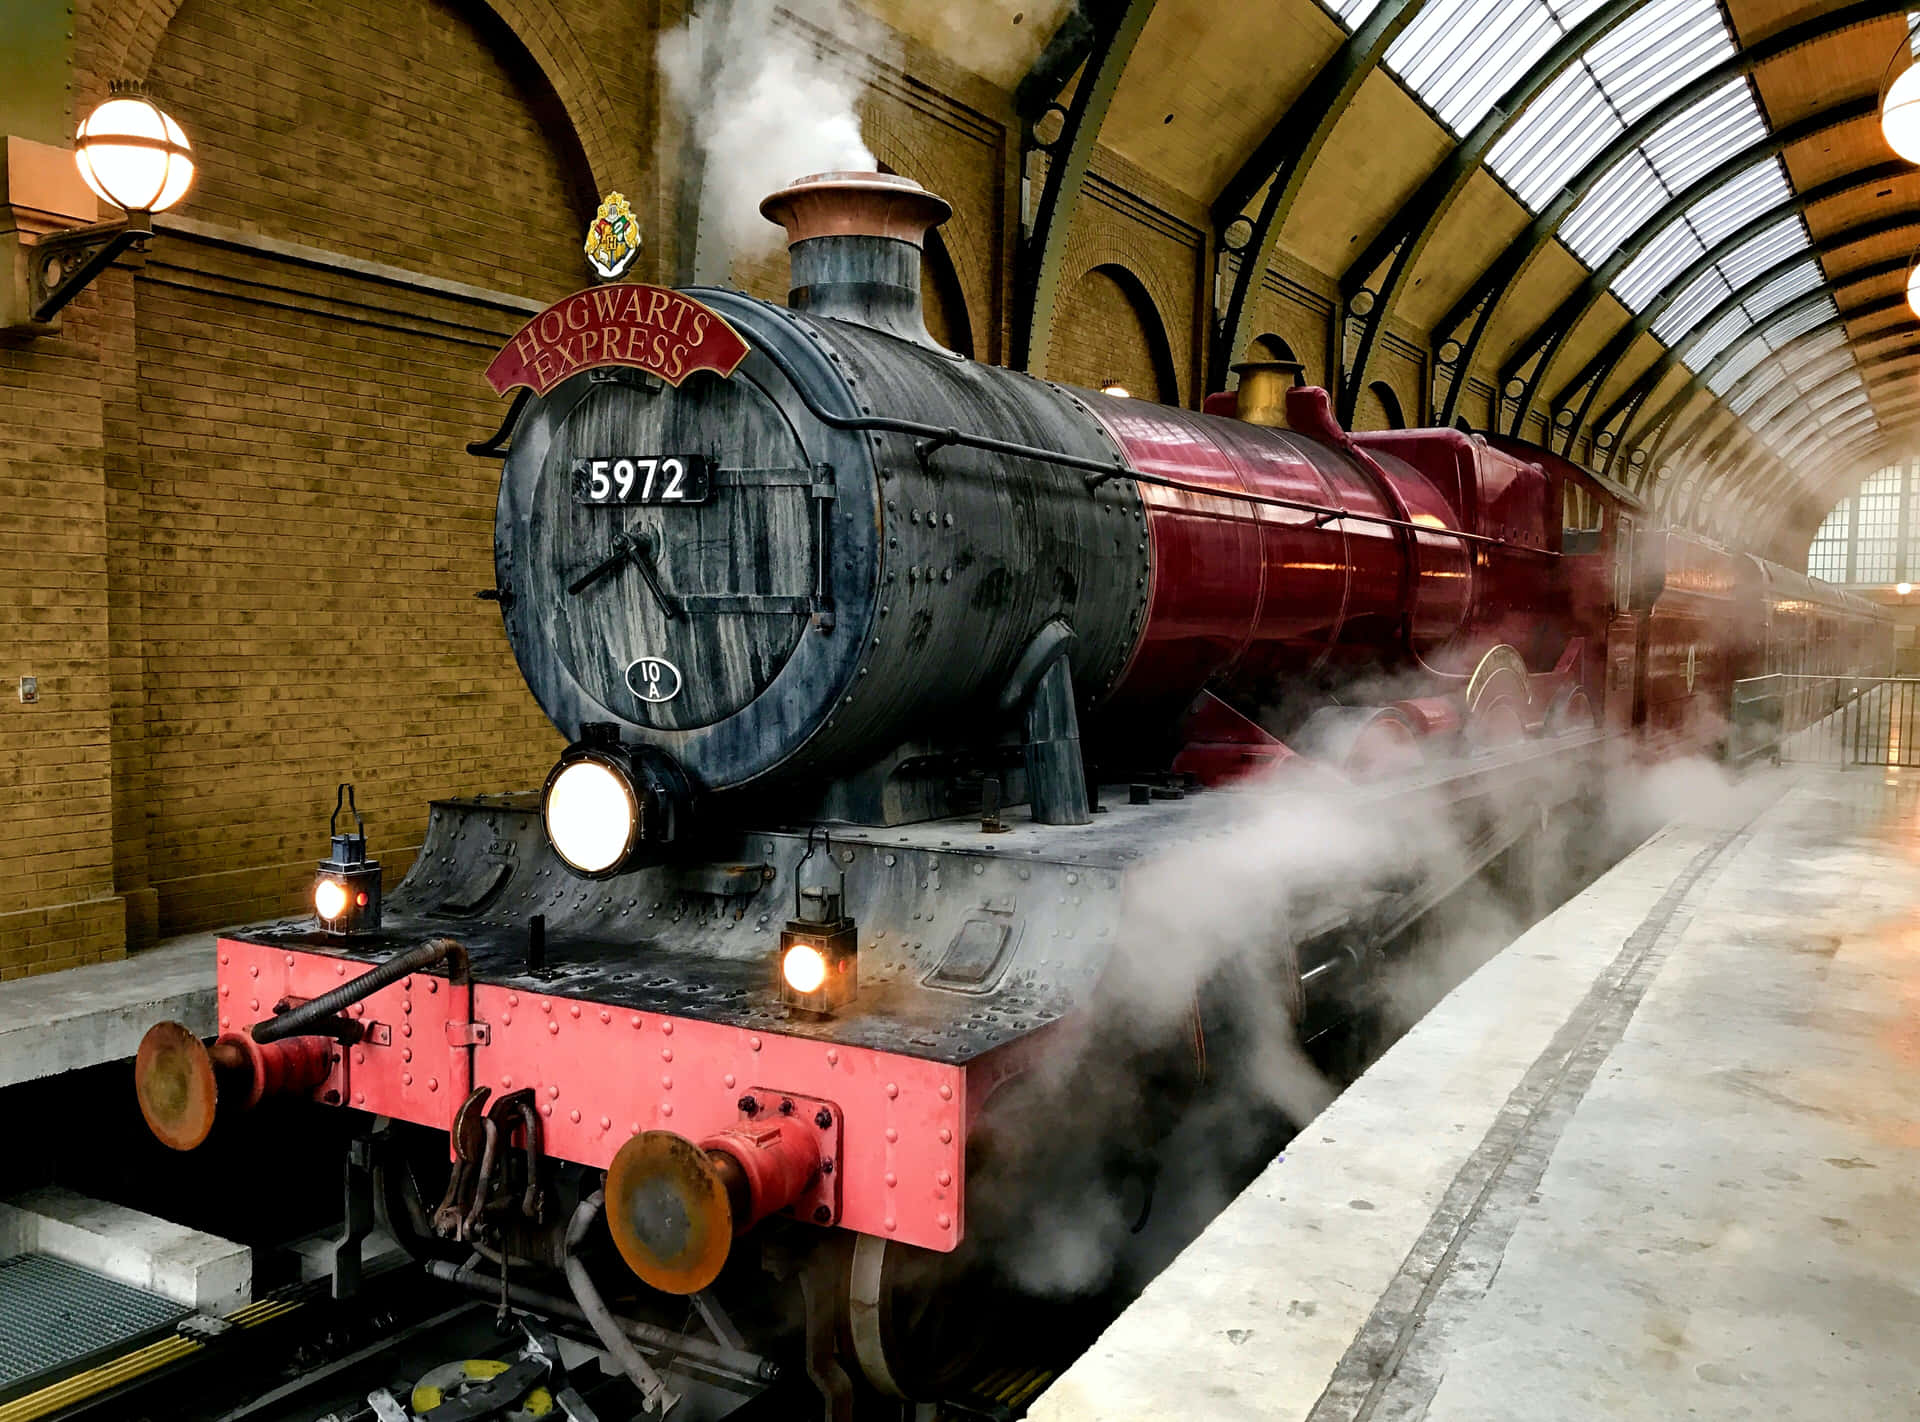 Hop on and take a magical journey aboard the iconic Hogwarts Express Train. Wallpaper